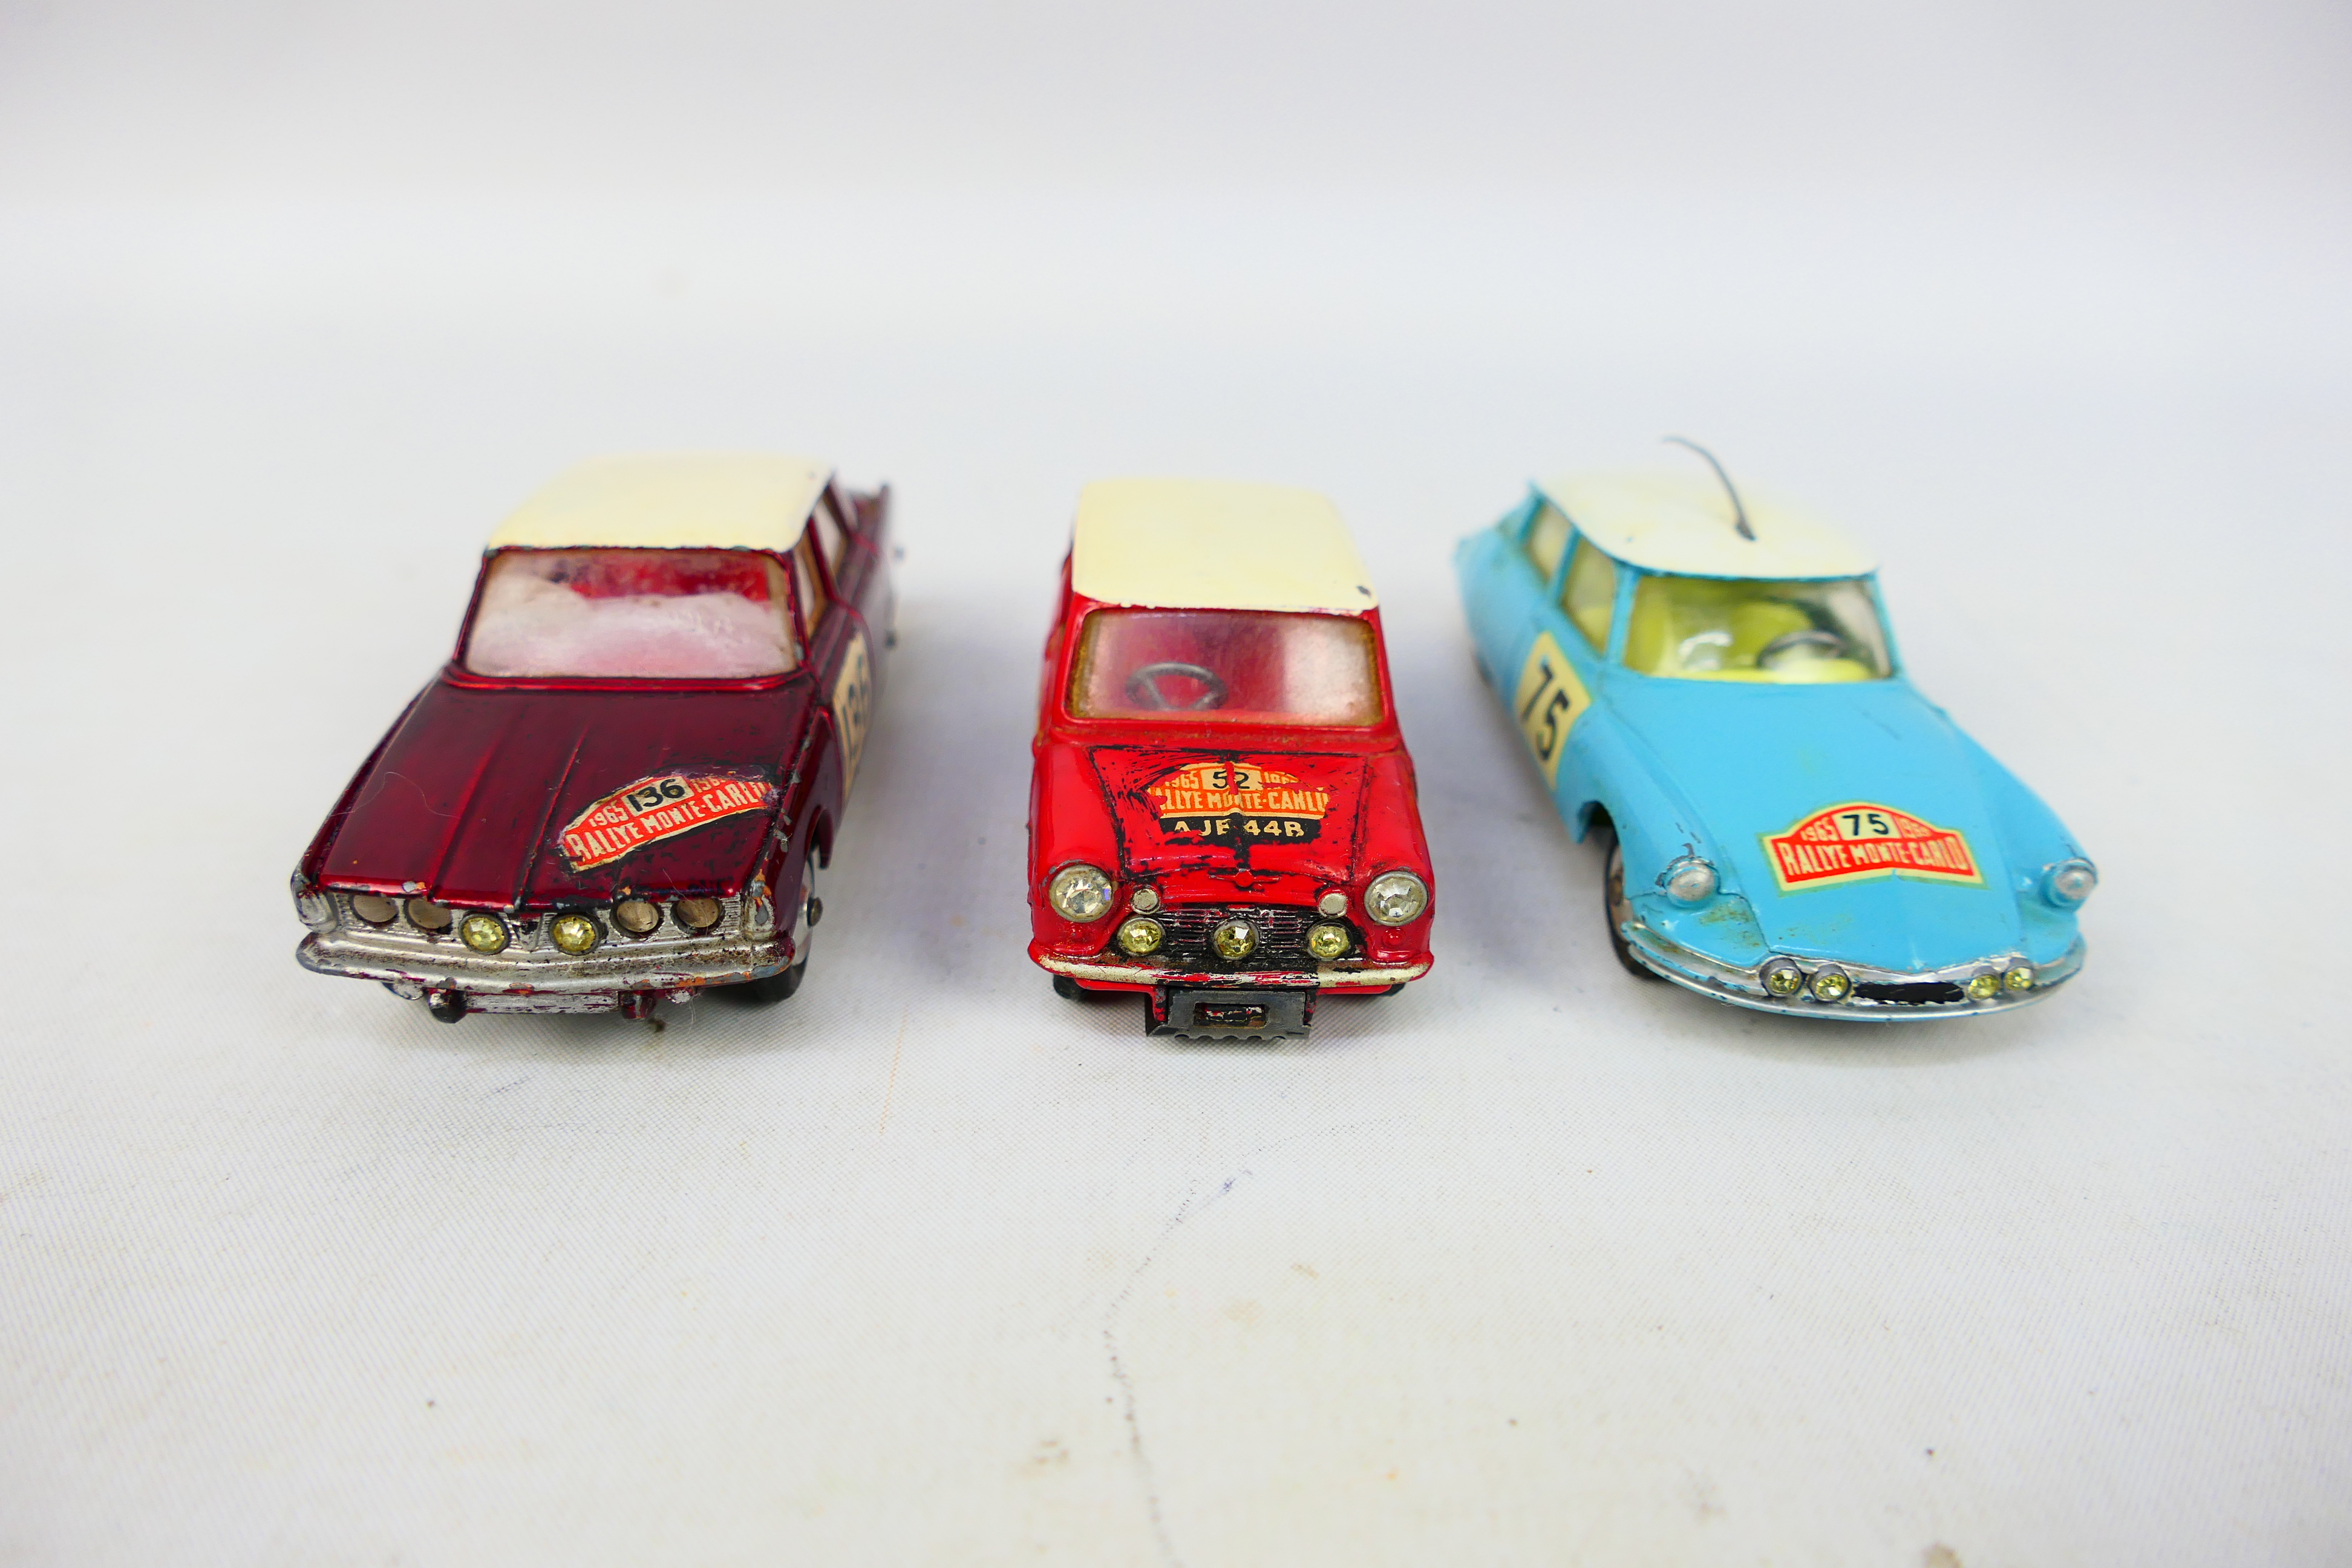 Corgi Toys - Three unboxed diecast model cars from the Corgi Toys 'Rally Monte Carlo' set. - Image 3 of 11